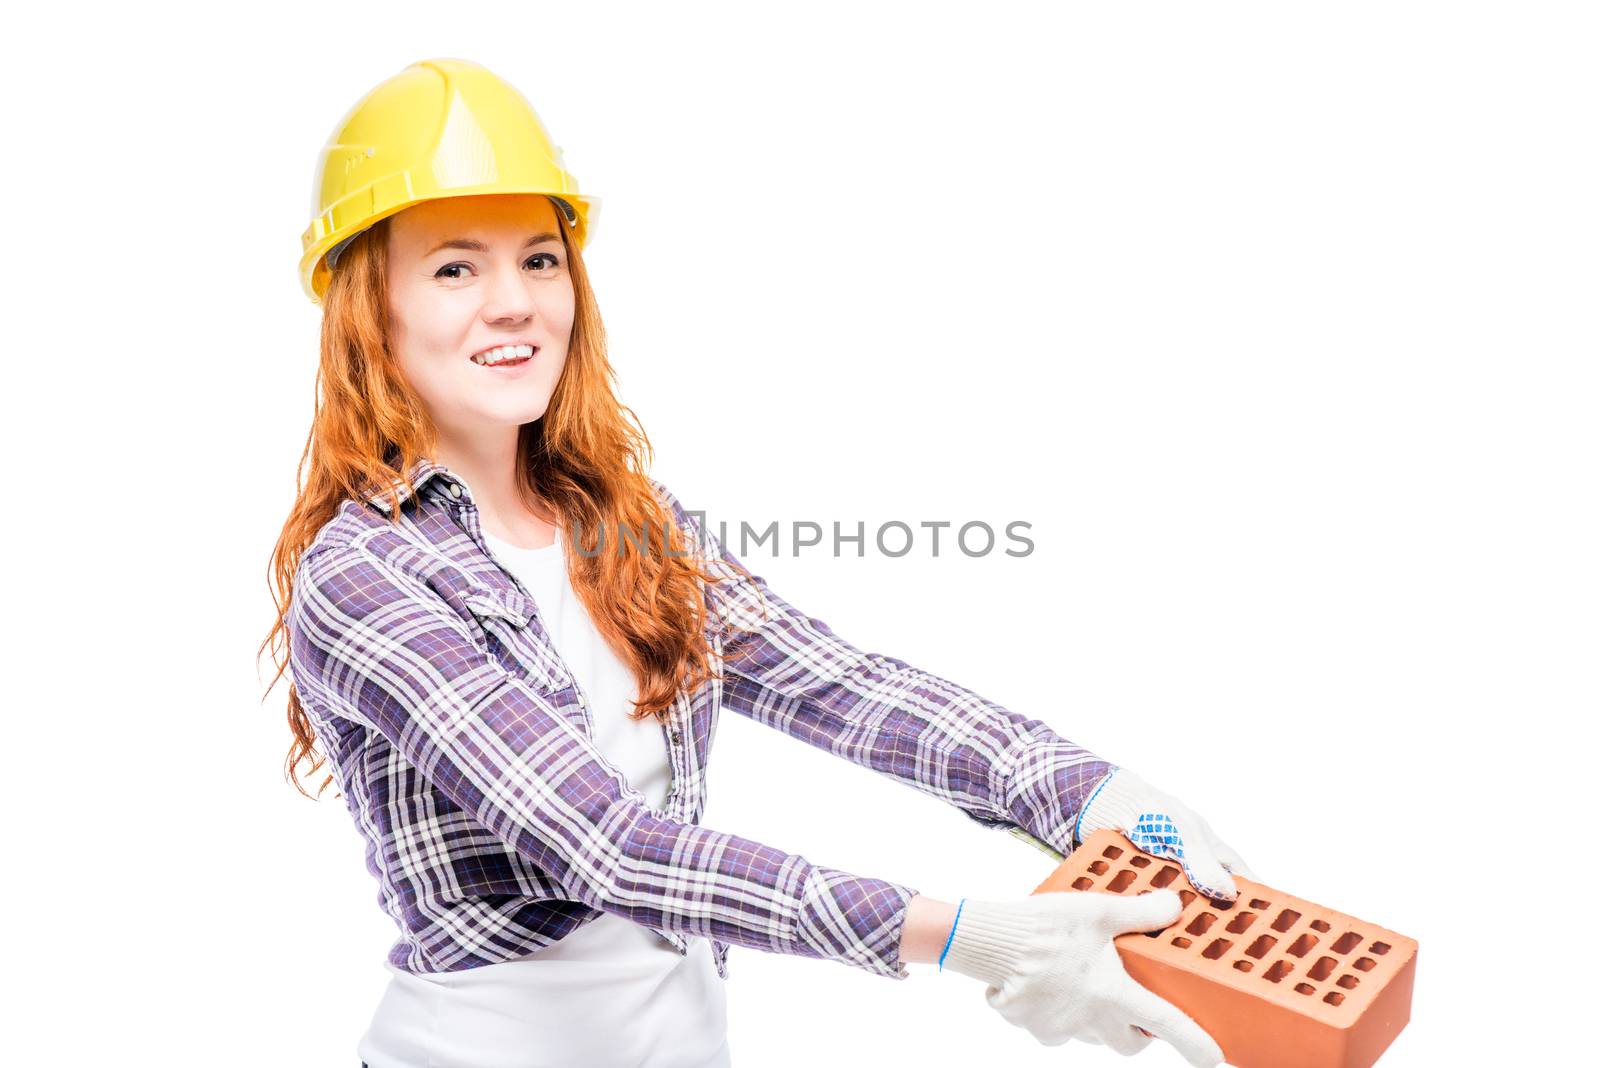 beautiful woman with red hair holds a brick, wearing a yellow helmet on her head